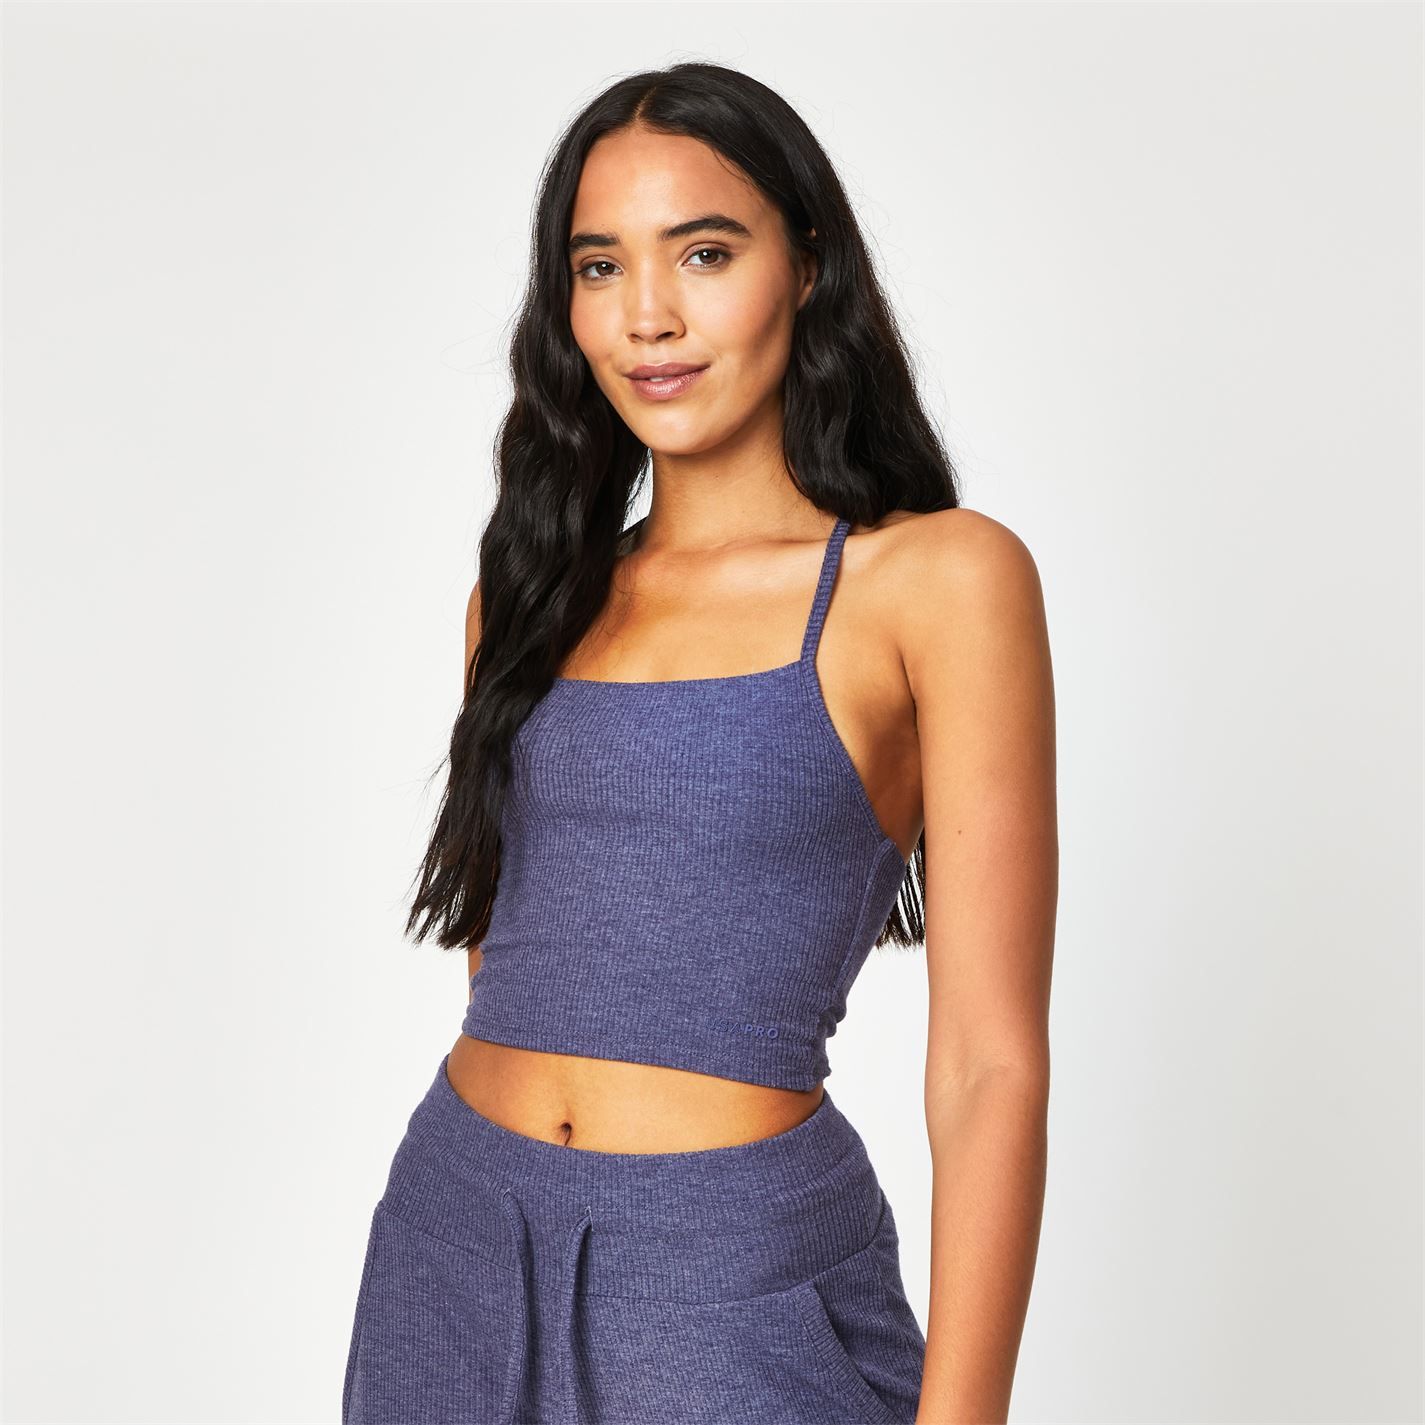 Take comfort to the next level with the USA Pro ribbed crop top, featuring a fashionably flattering square neckline. The soft-touch fabric and ribbed design will keep you feeling cosy while a unique strap detail features a stylish twist. Pair with the USA Pro ribbed joggers for a complete loungewear set.